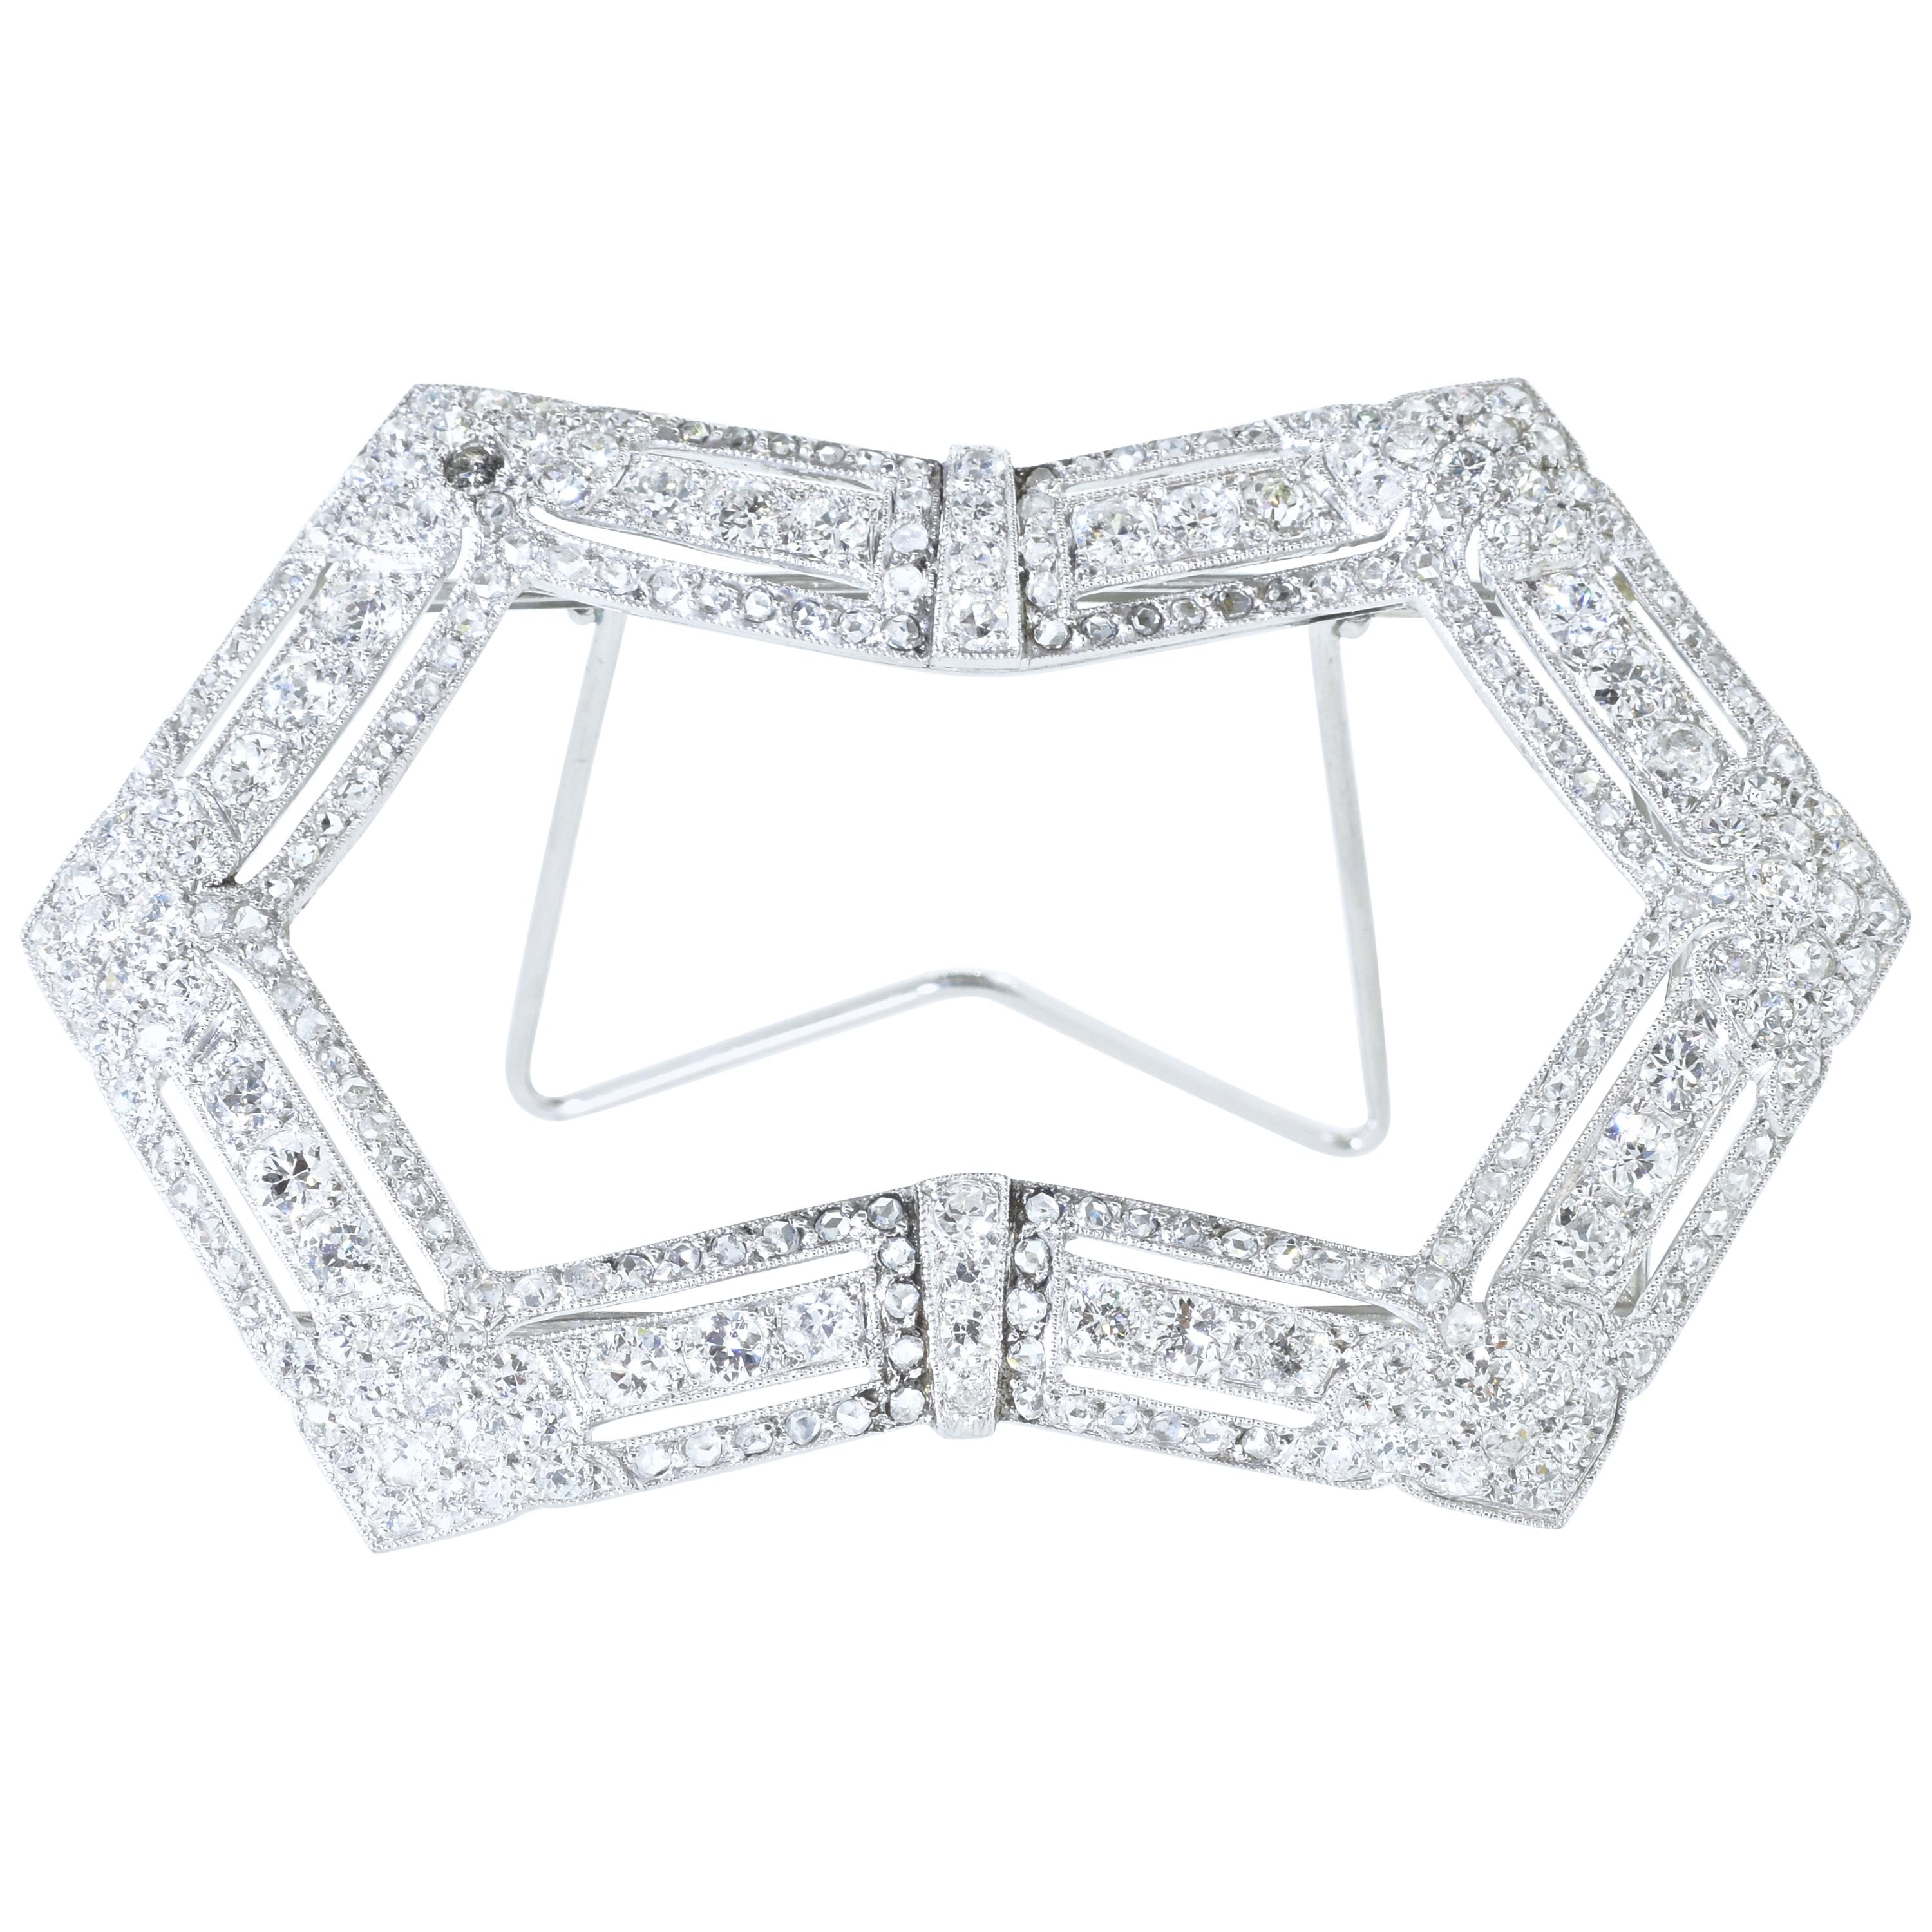 Antique diamond small desk size  frame for pictures is 2.5 inches by 1.5 inches.  It has approximately 5.5 cts of European, mine and rose cut diamonds.  The diamonds are white and bright.  A picture will fit within the back brackets.  this charming